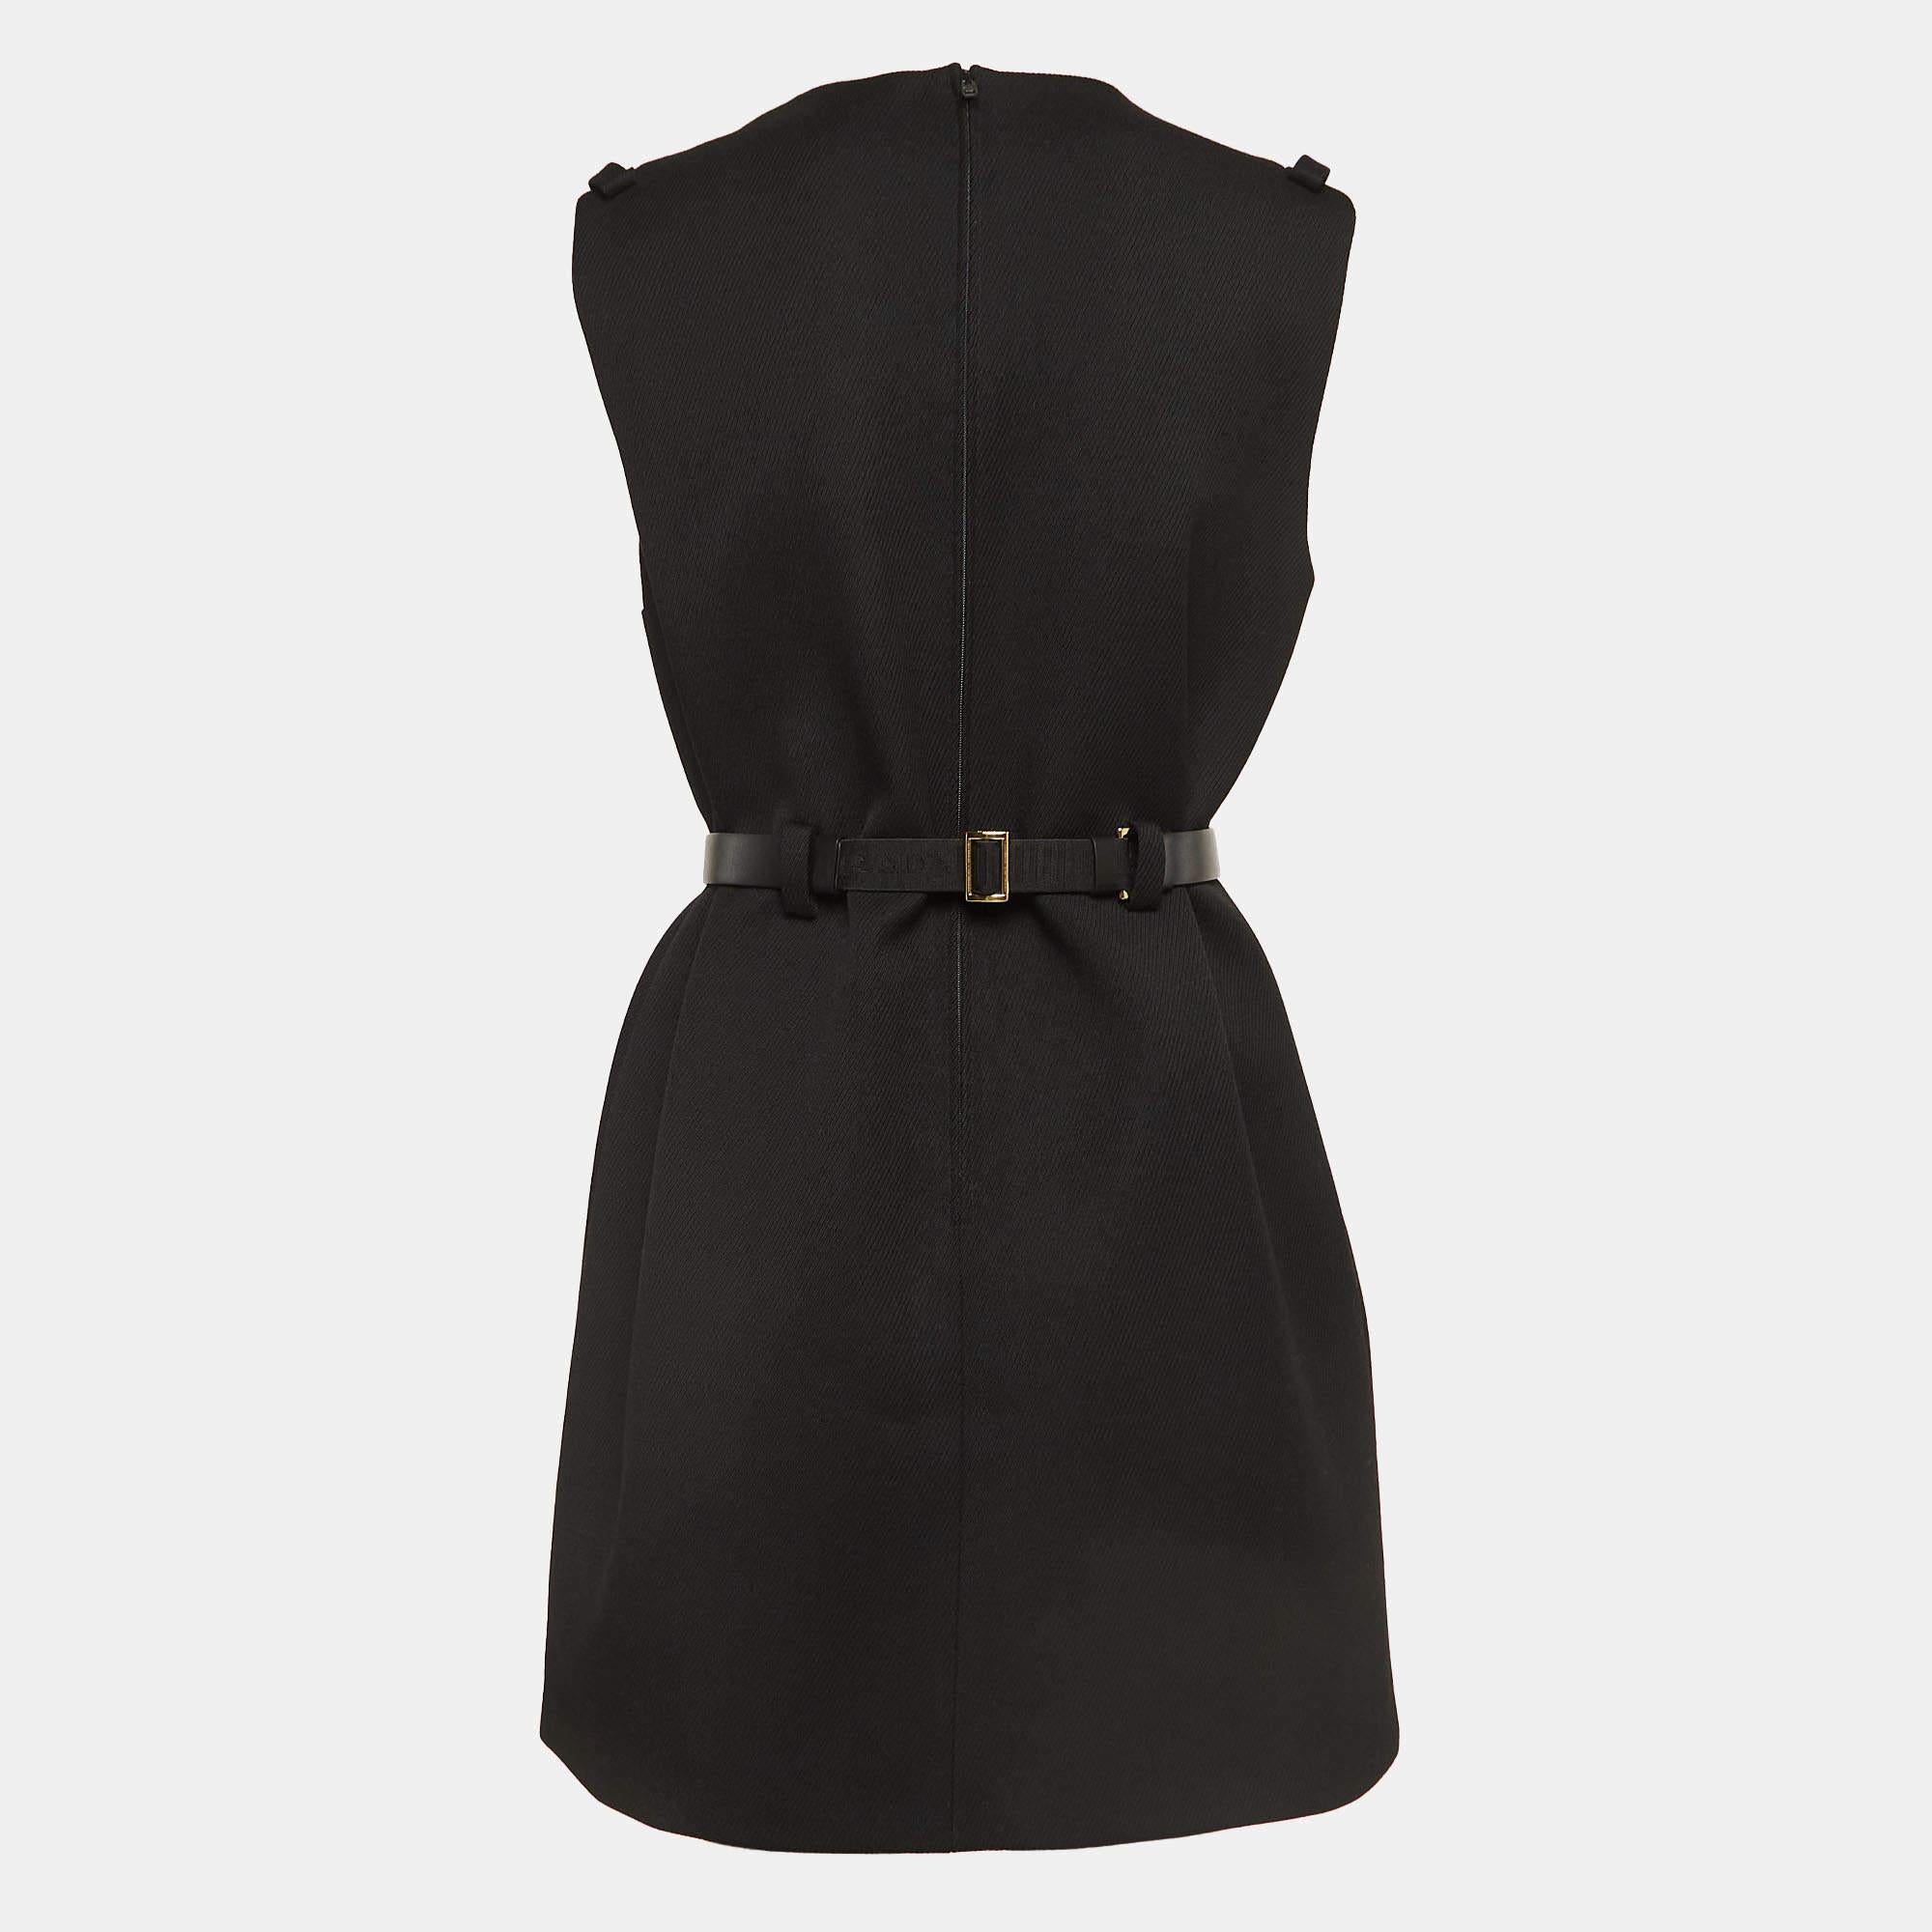 This Prada dress is a chic and stylish garment that exudes elegance and sophistication. With its sleek design, flattering silhouette, and high-quality craftsmanship, this dress is perfect for any special occasion or evening event, ensuring you stand